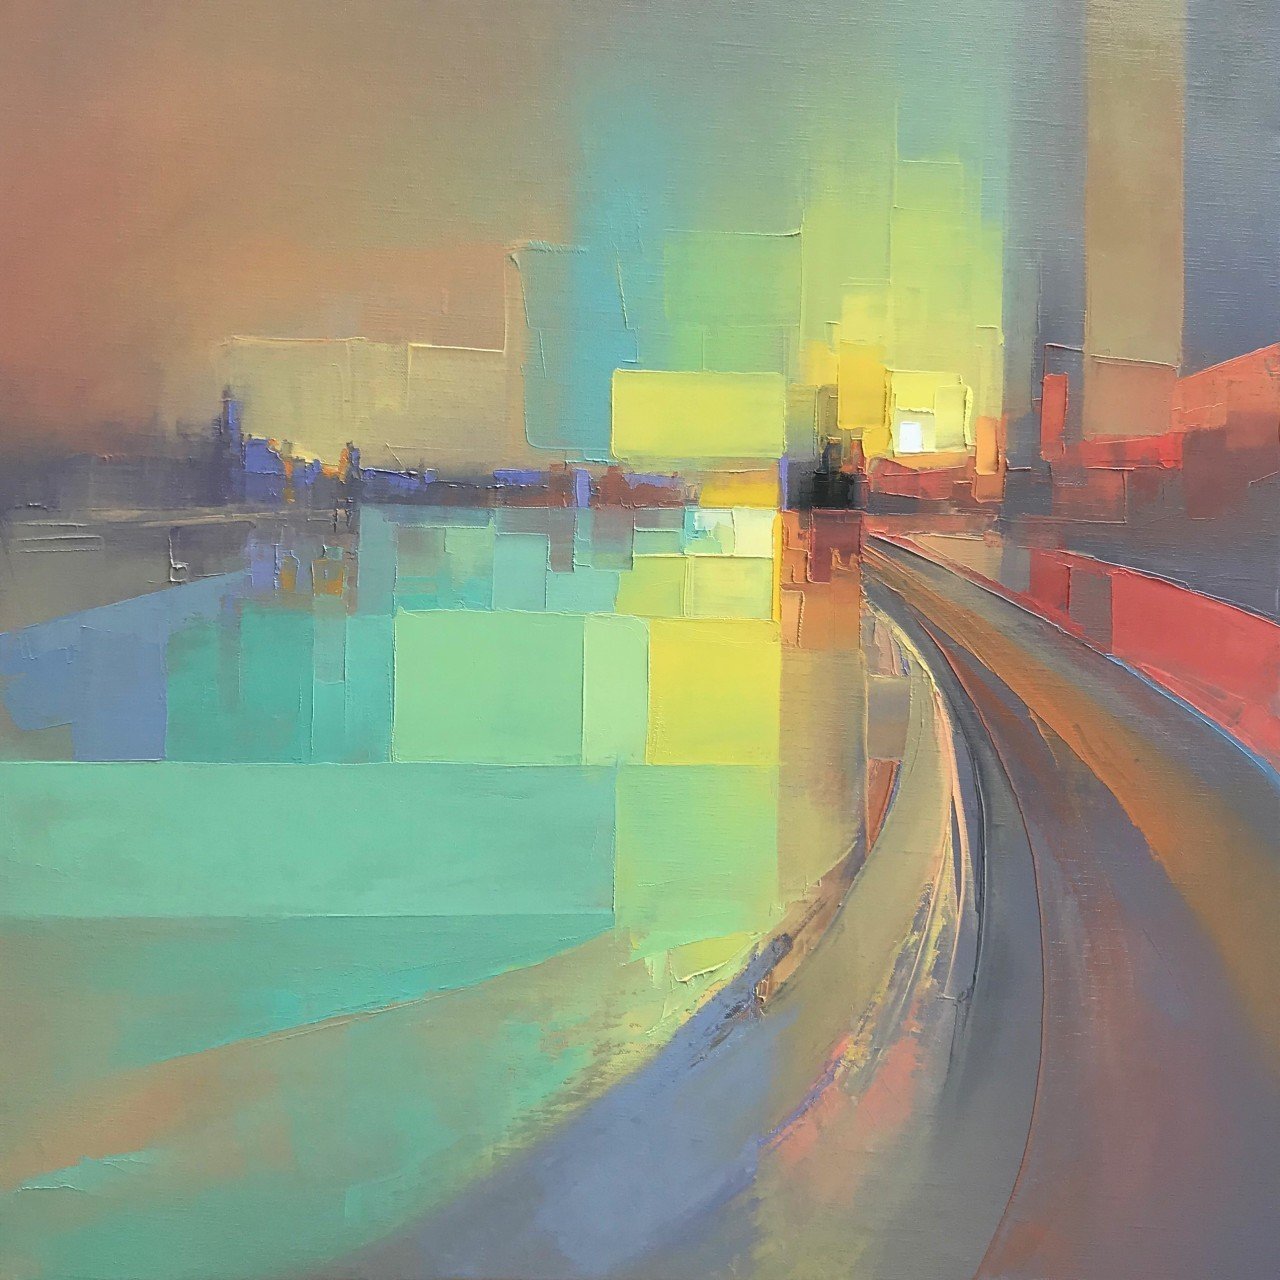 Landscapes by Jason Anderson Blend Precise Pixelation and Hazy Abstraction